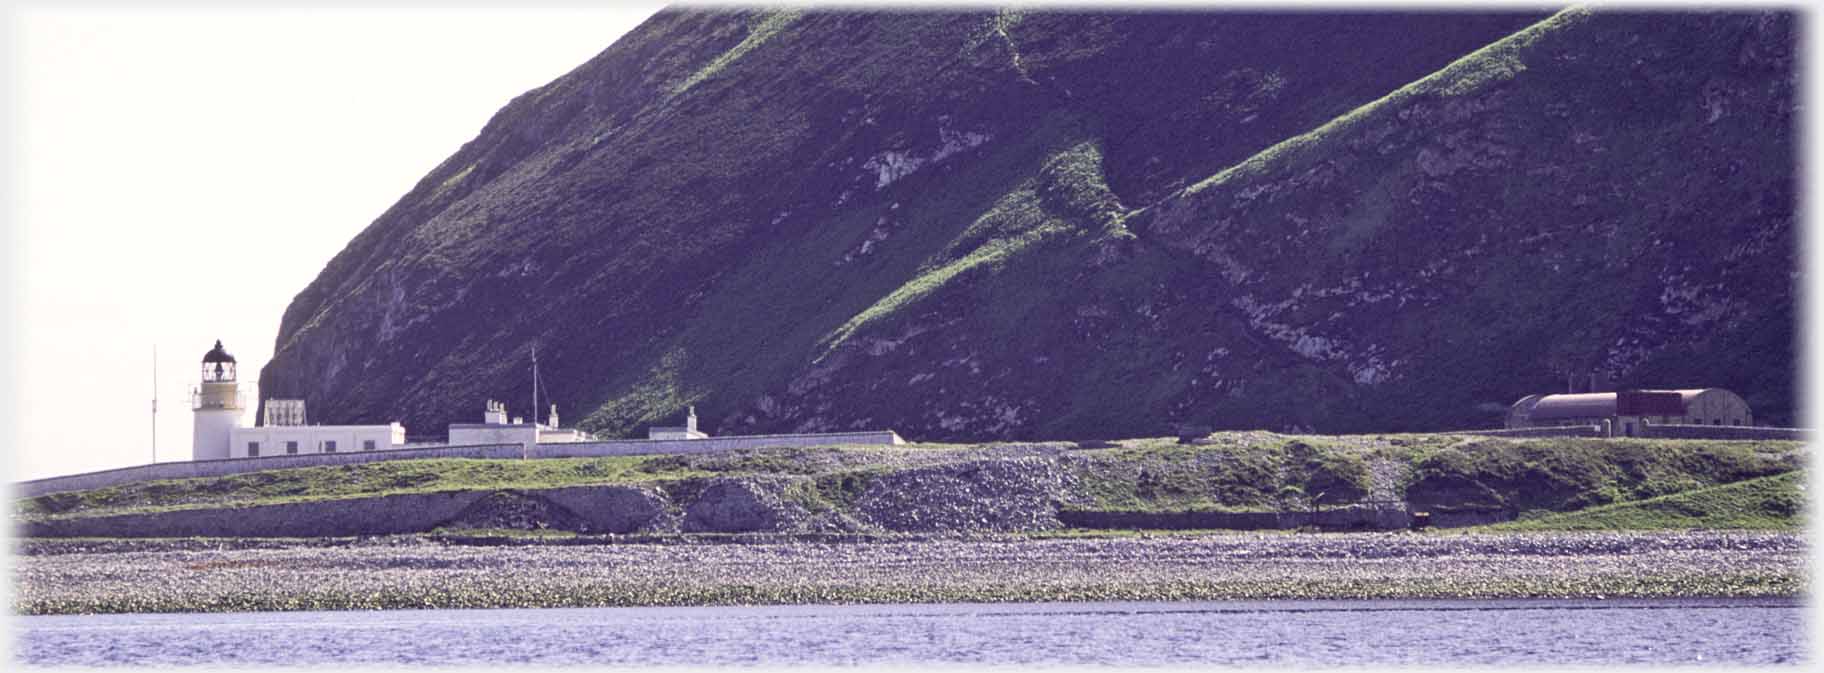 Lighthouse on shore under hill.